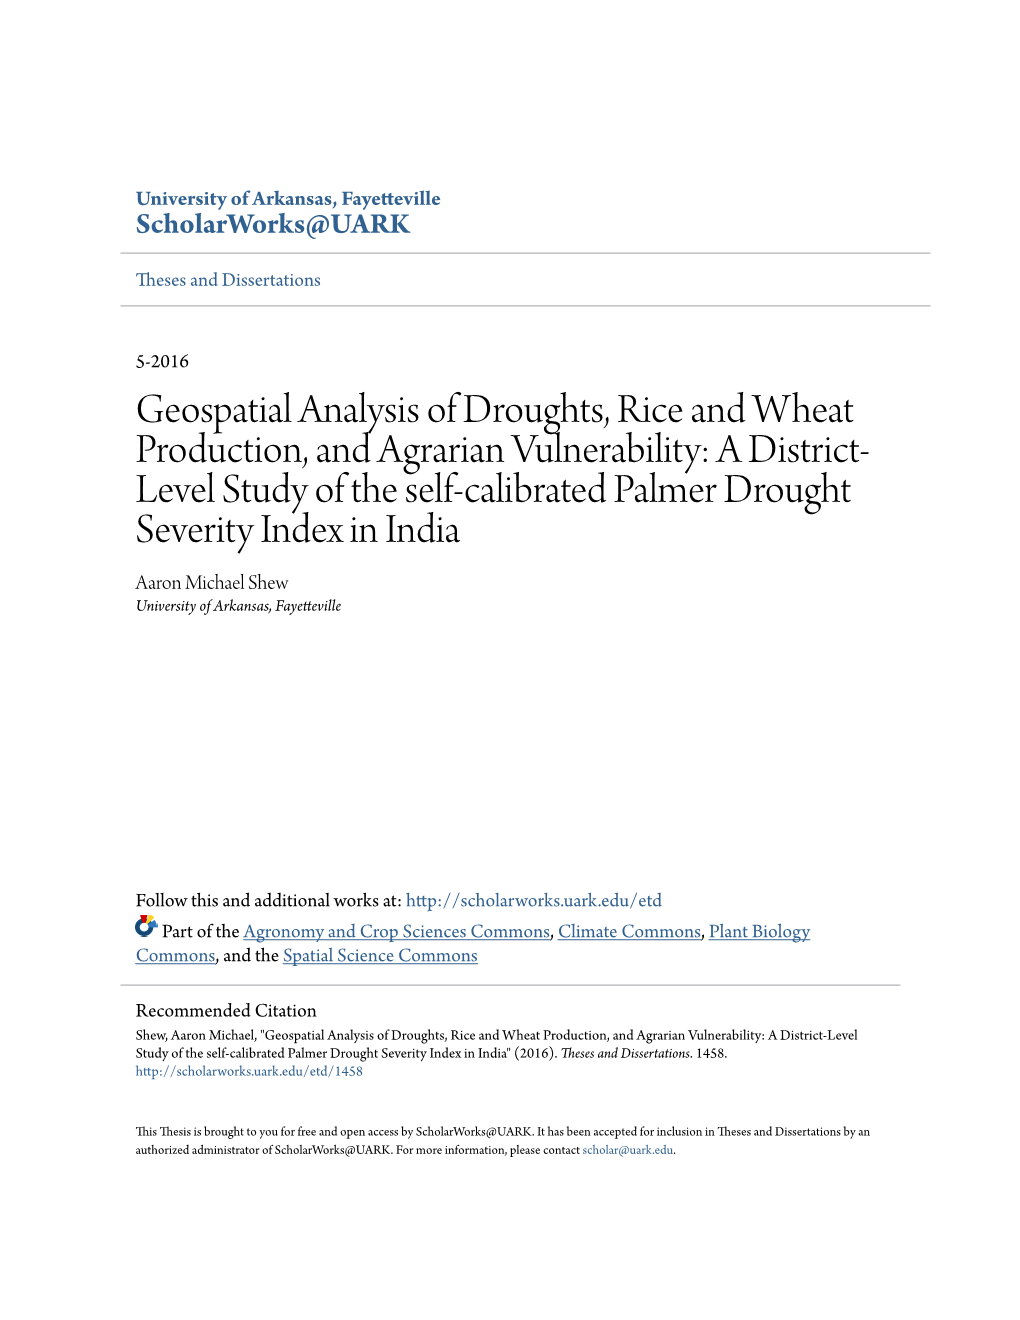 Geospatial Analysis of Droughts, Rice and Wheat Production, And